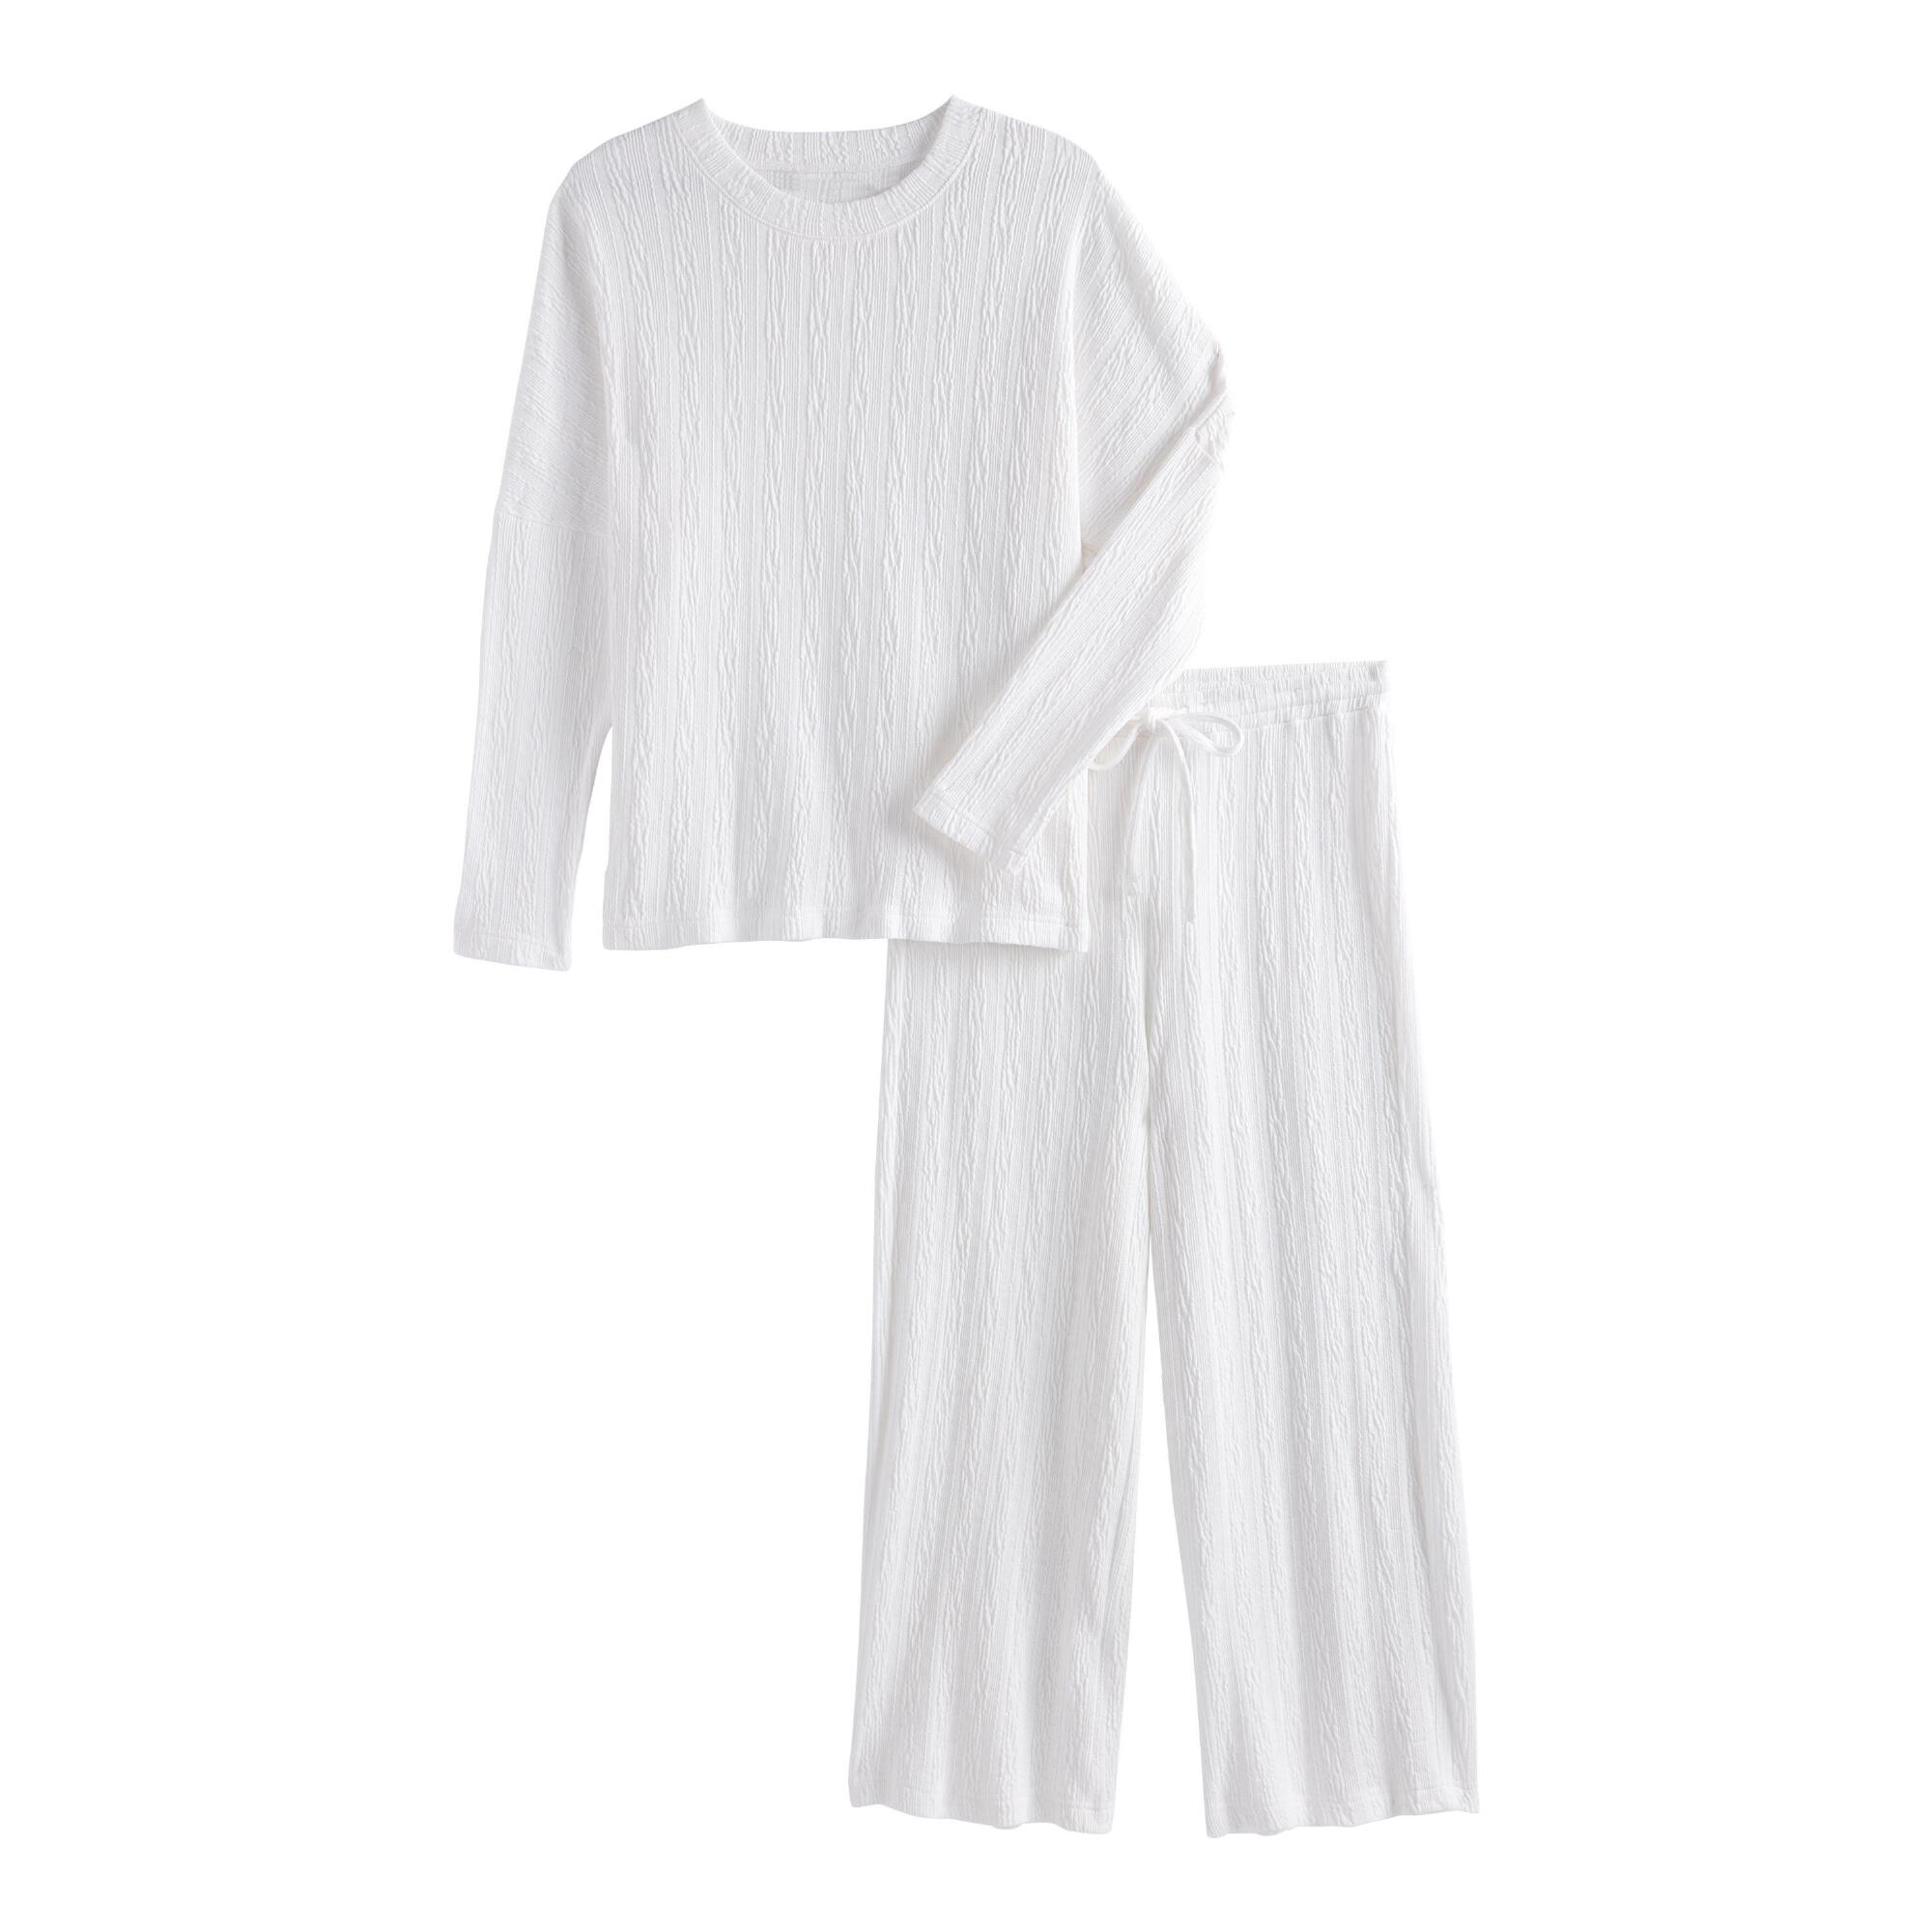 White Textured Loungewear Collection by World Market